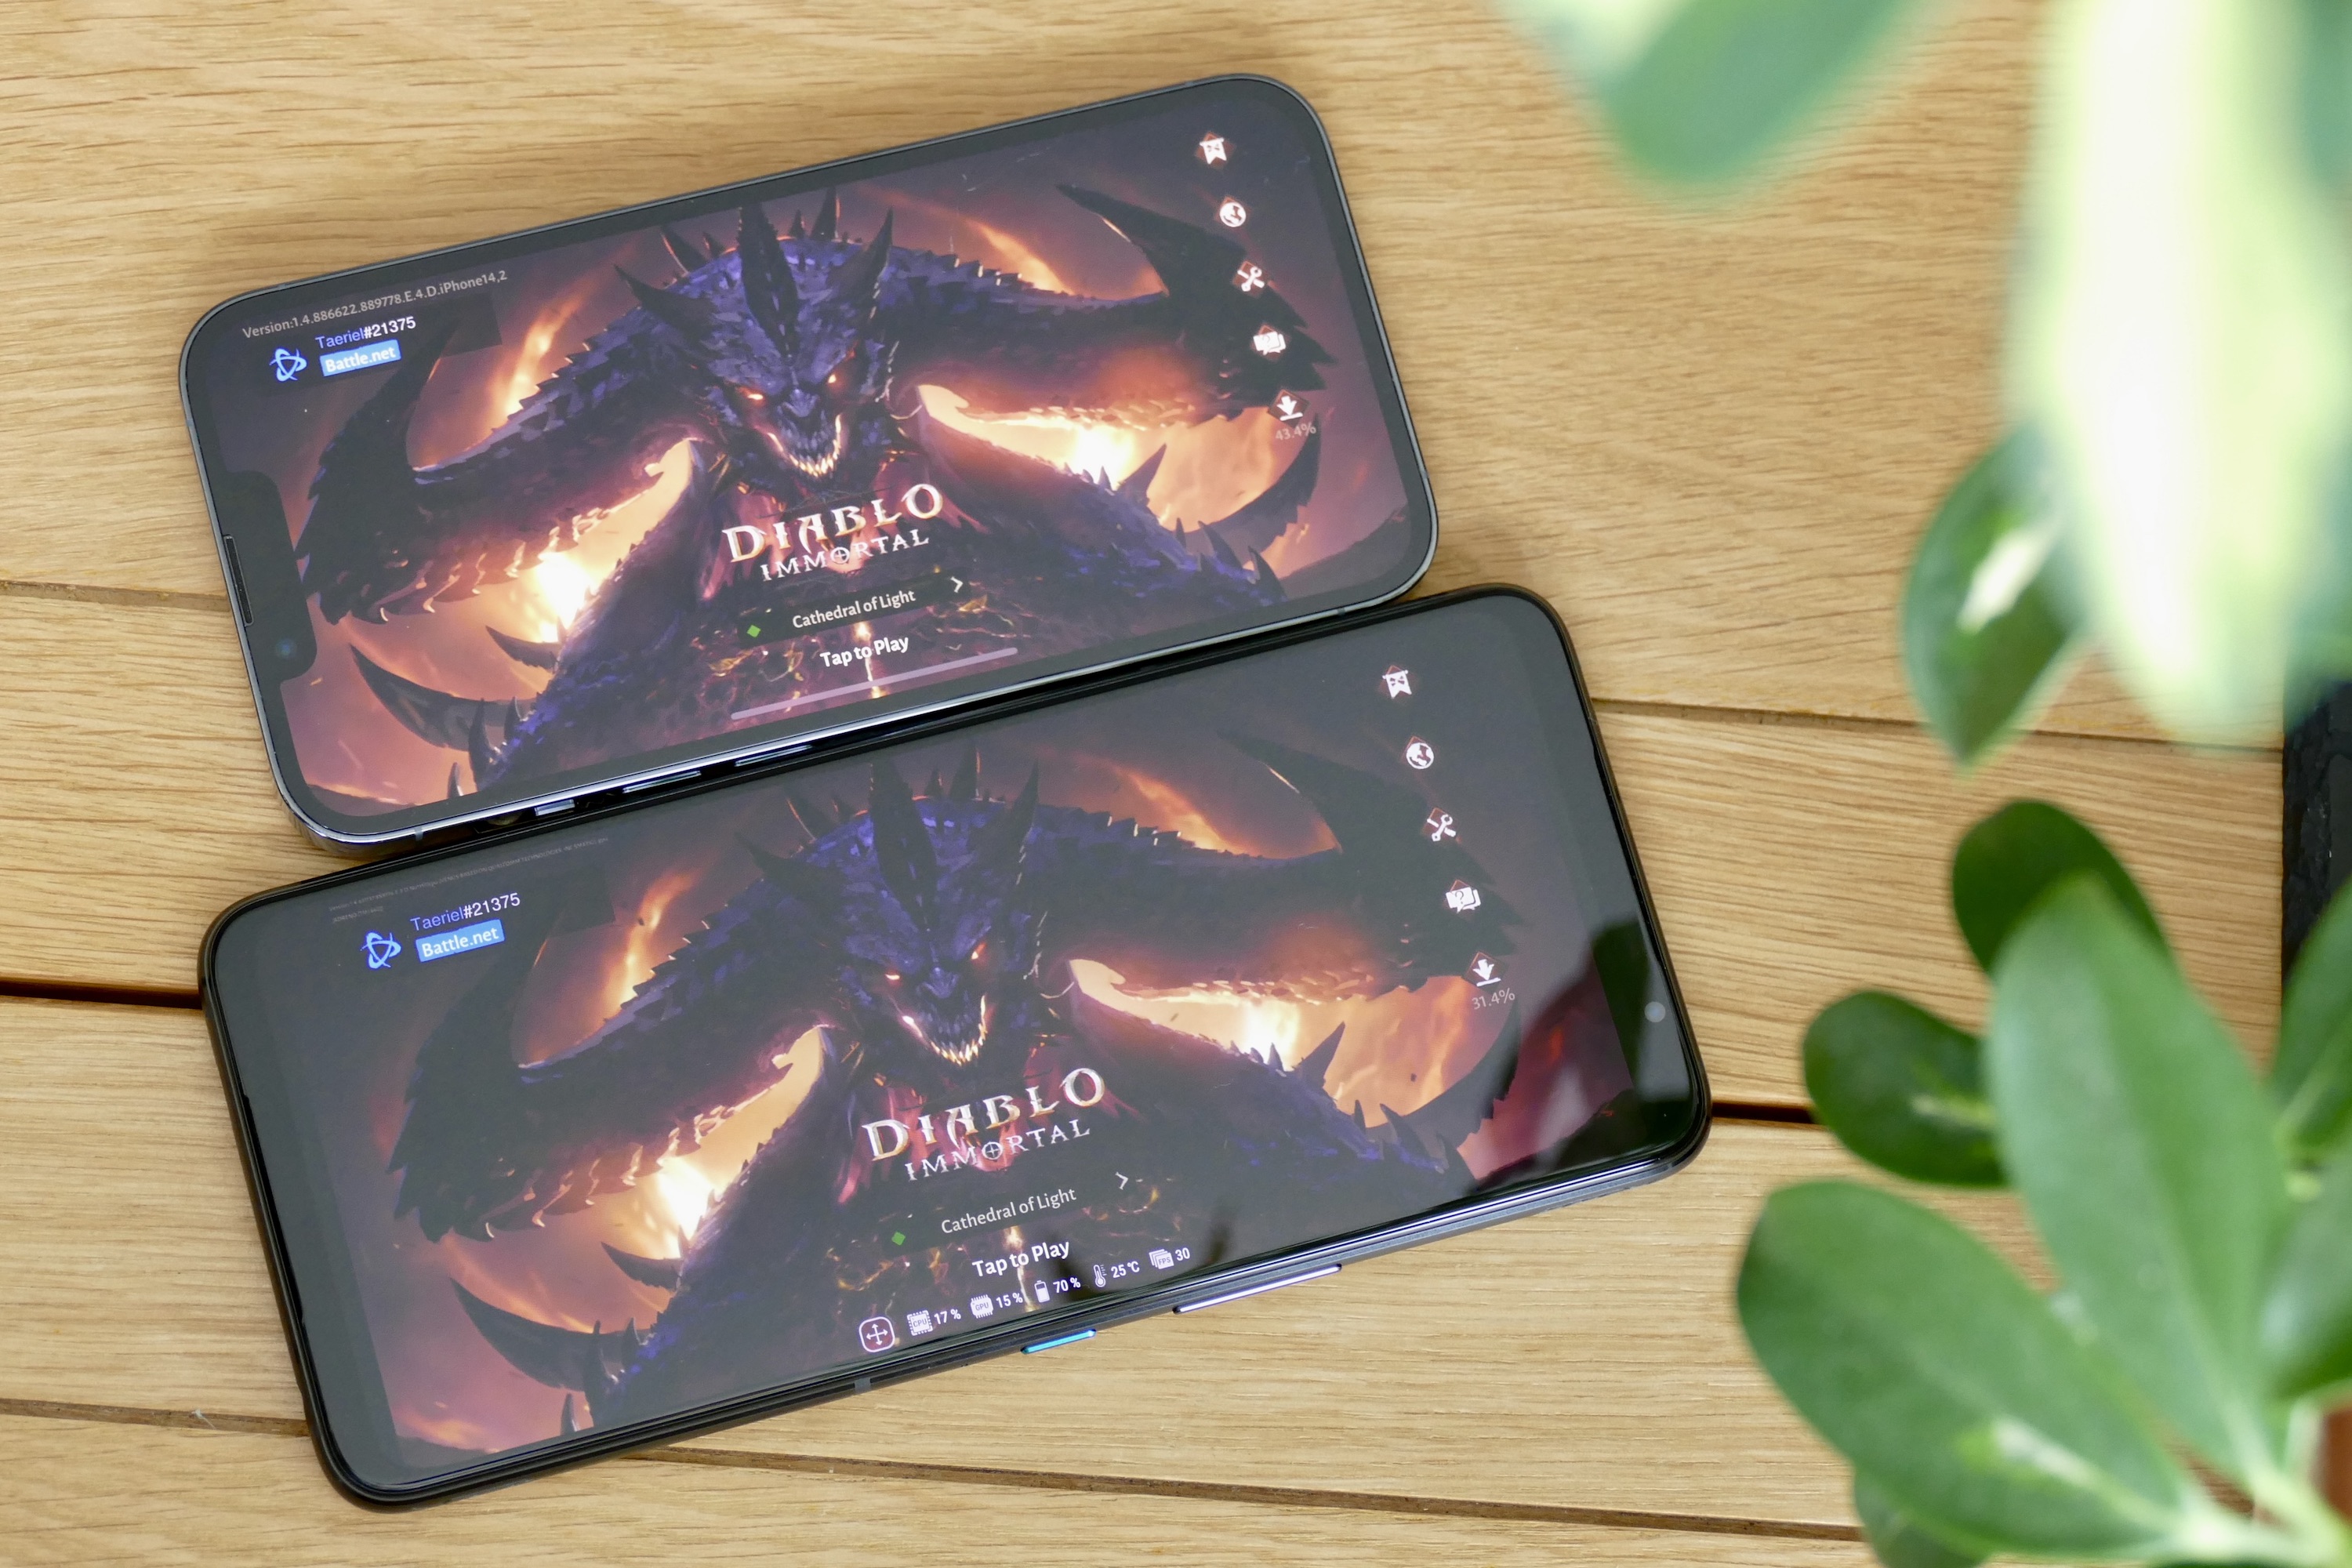 Diablo Immortal Hits Android, iOS and PC on June 2 - CNET